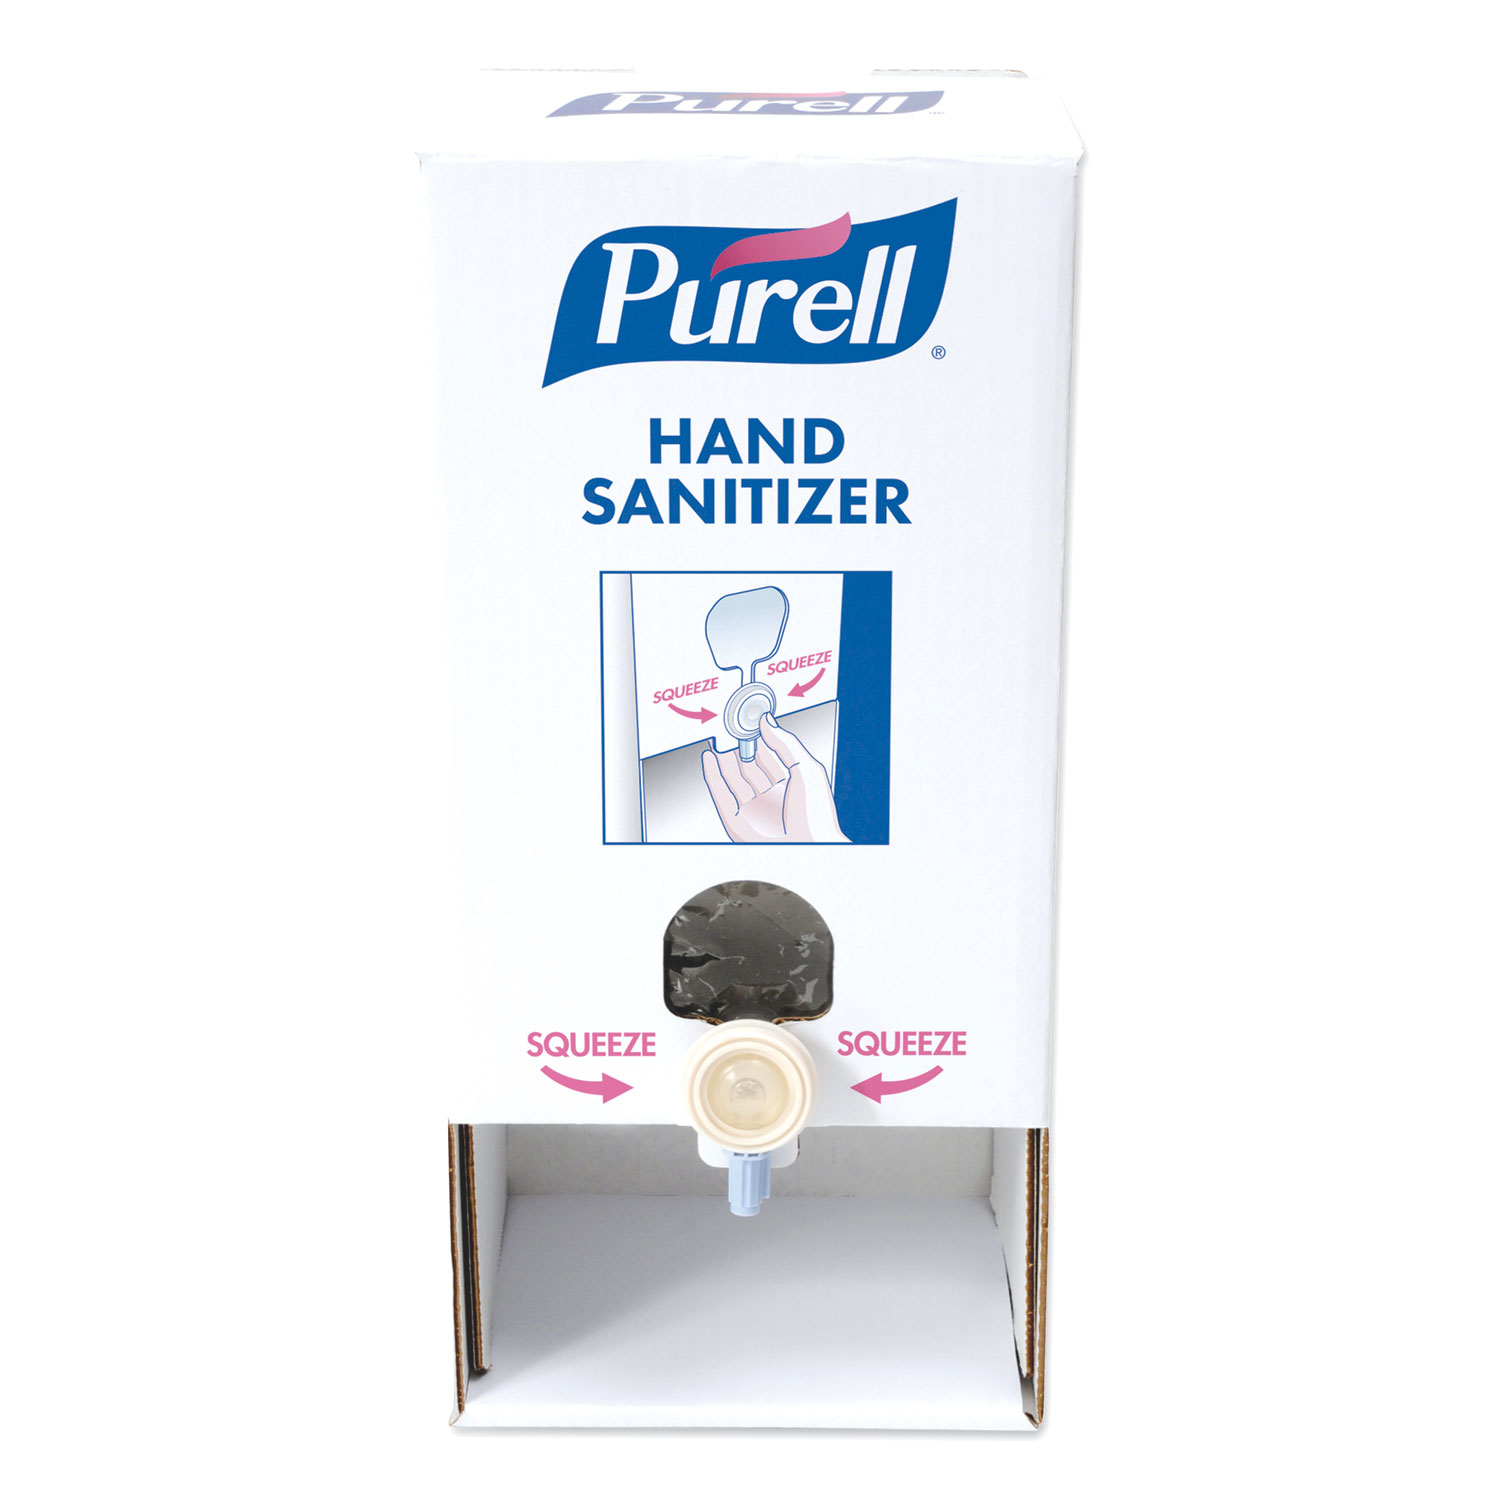 PURELL® Quick Tabletop Stand Kit, Includes Two NXT Refills Advanced Gel Hand Sanitizer, 1,000 mL